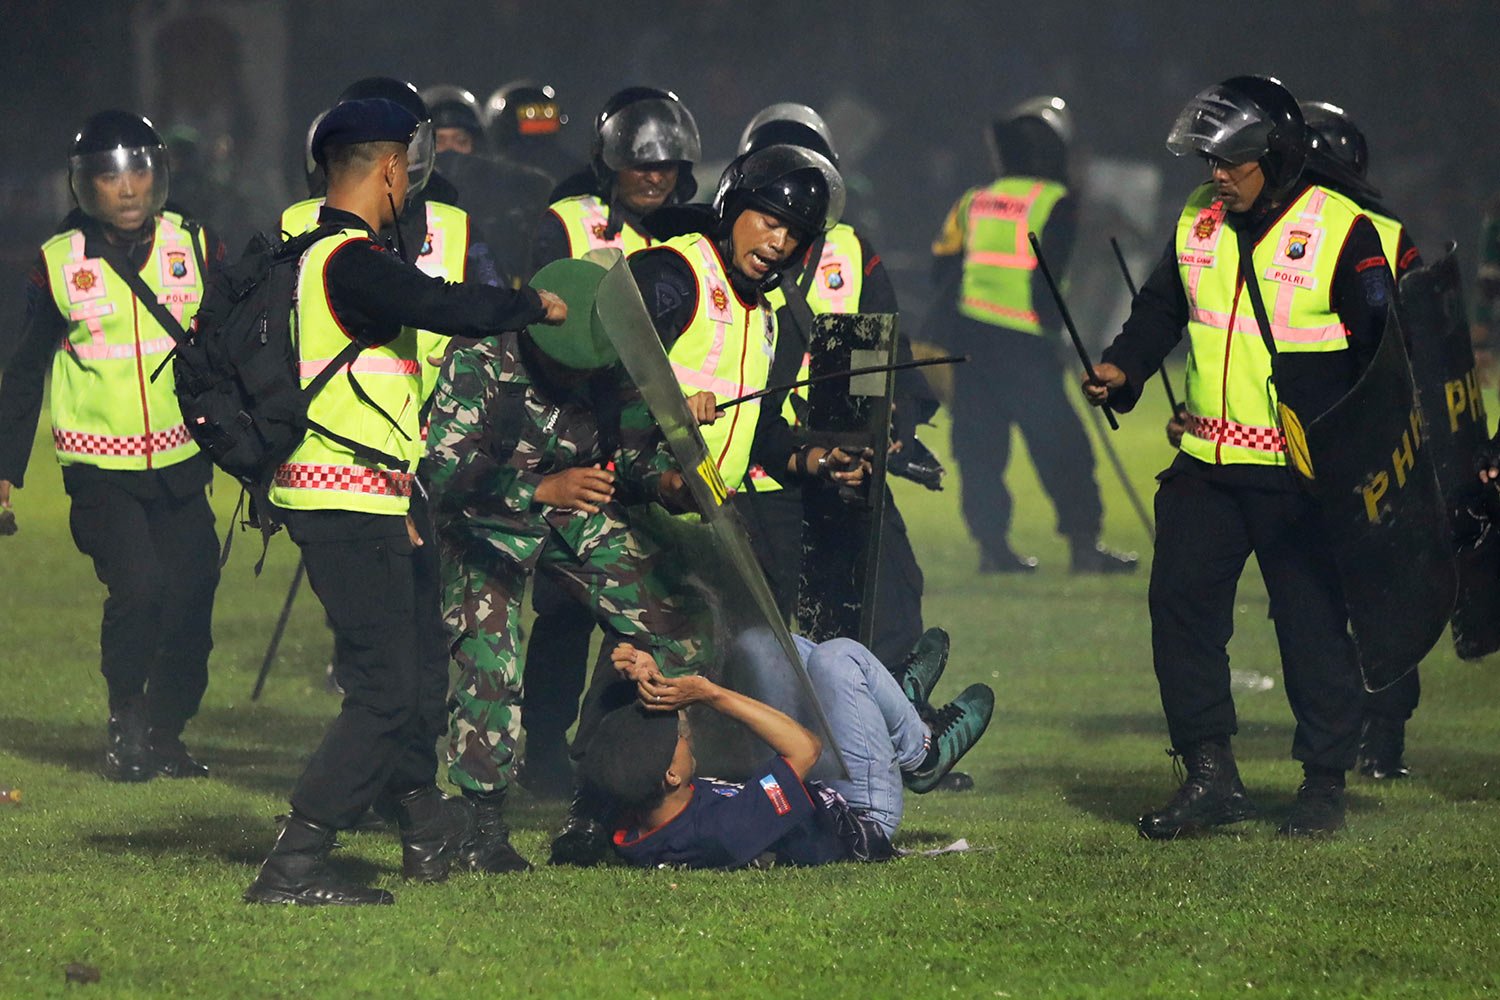  Security officers detain a fan during a clash between supporters of two Indonesian soccer teams at Kanjuruhan Stadium in Malang, East Java, Indonesia, Saturday, Oct. 1, 2022.  (AP Photo/Yudha Prabowo) 